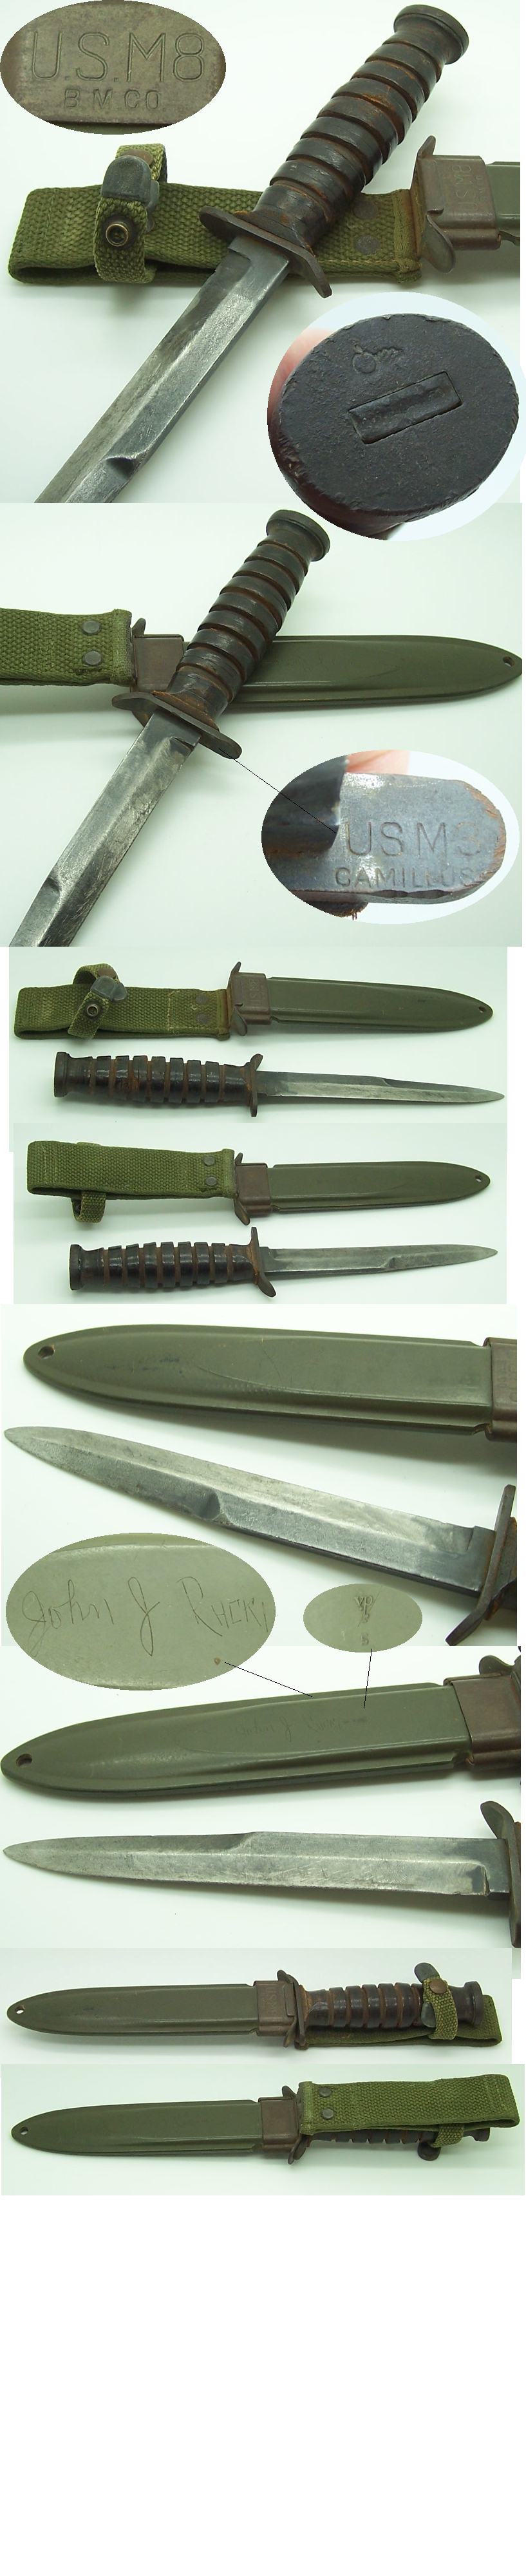 US WWII M3 Fighting Knife & M8 Scabbard, Camillus